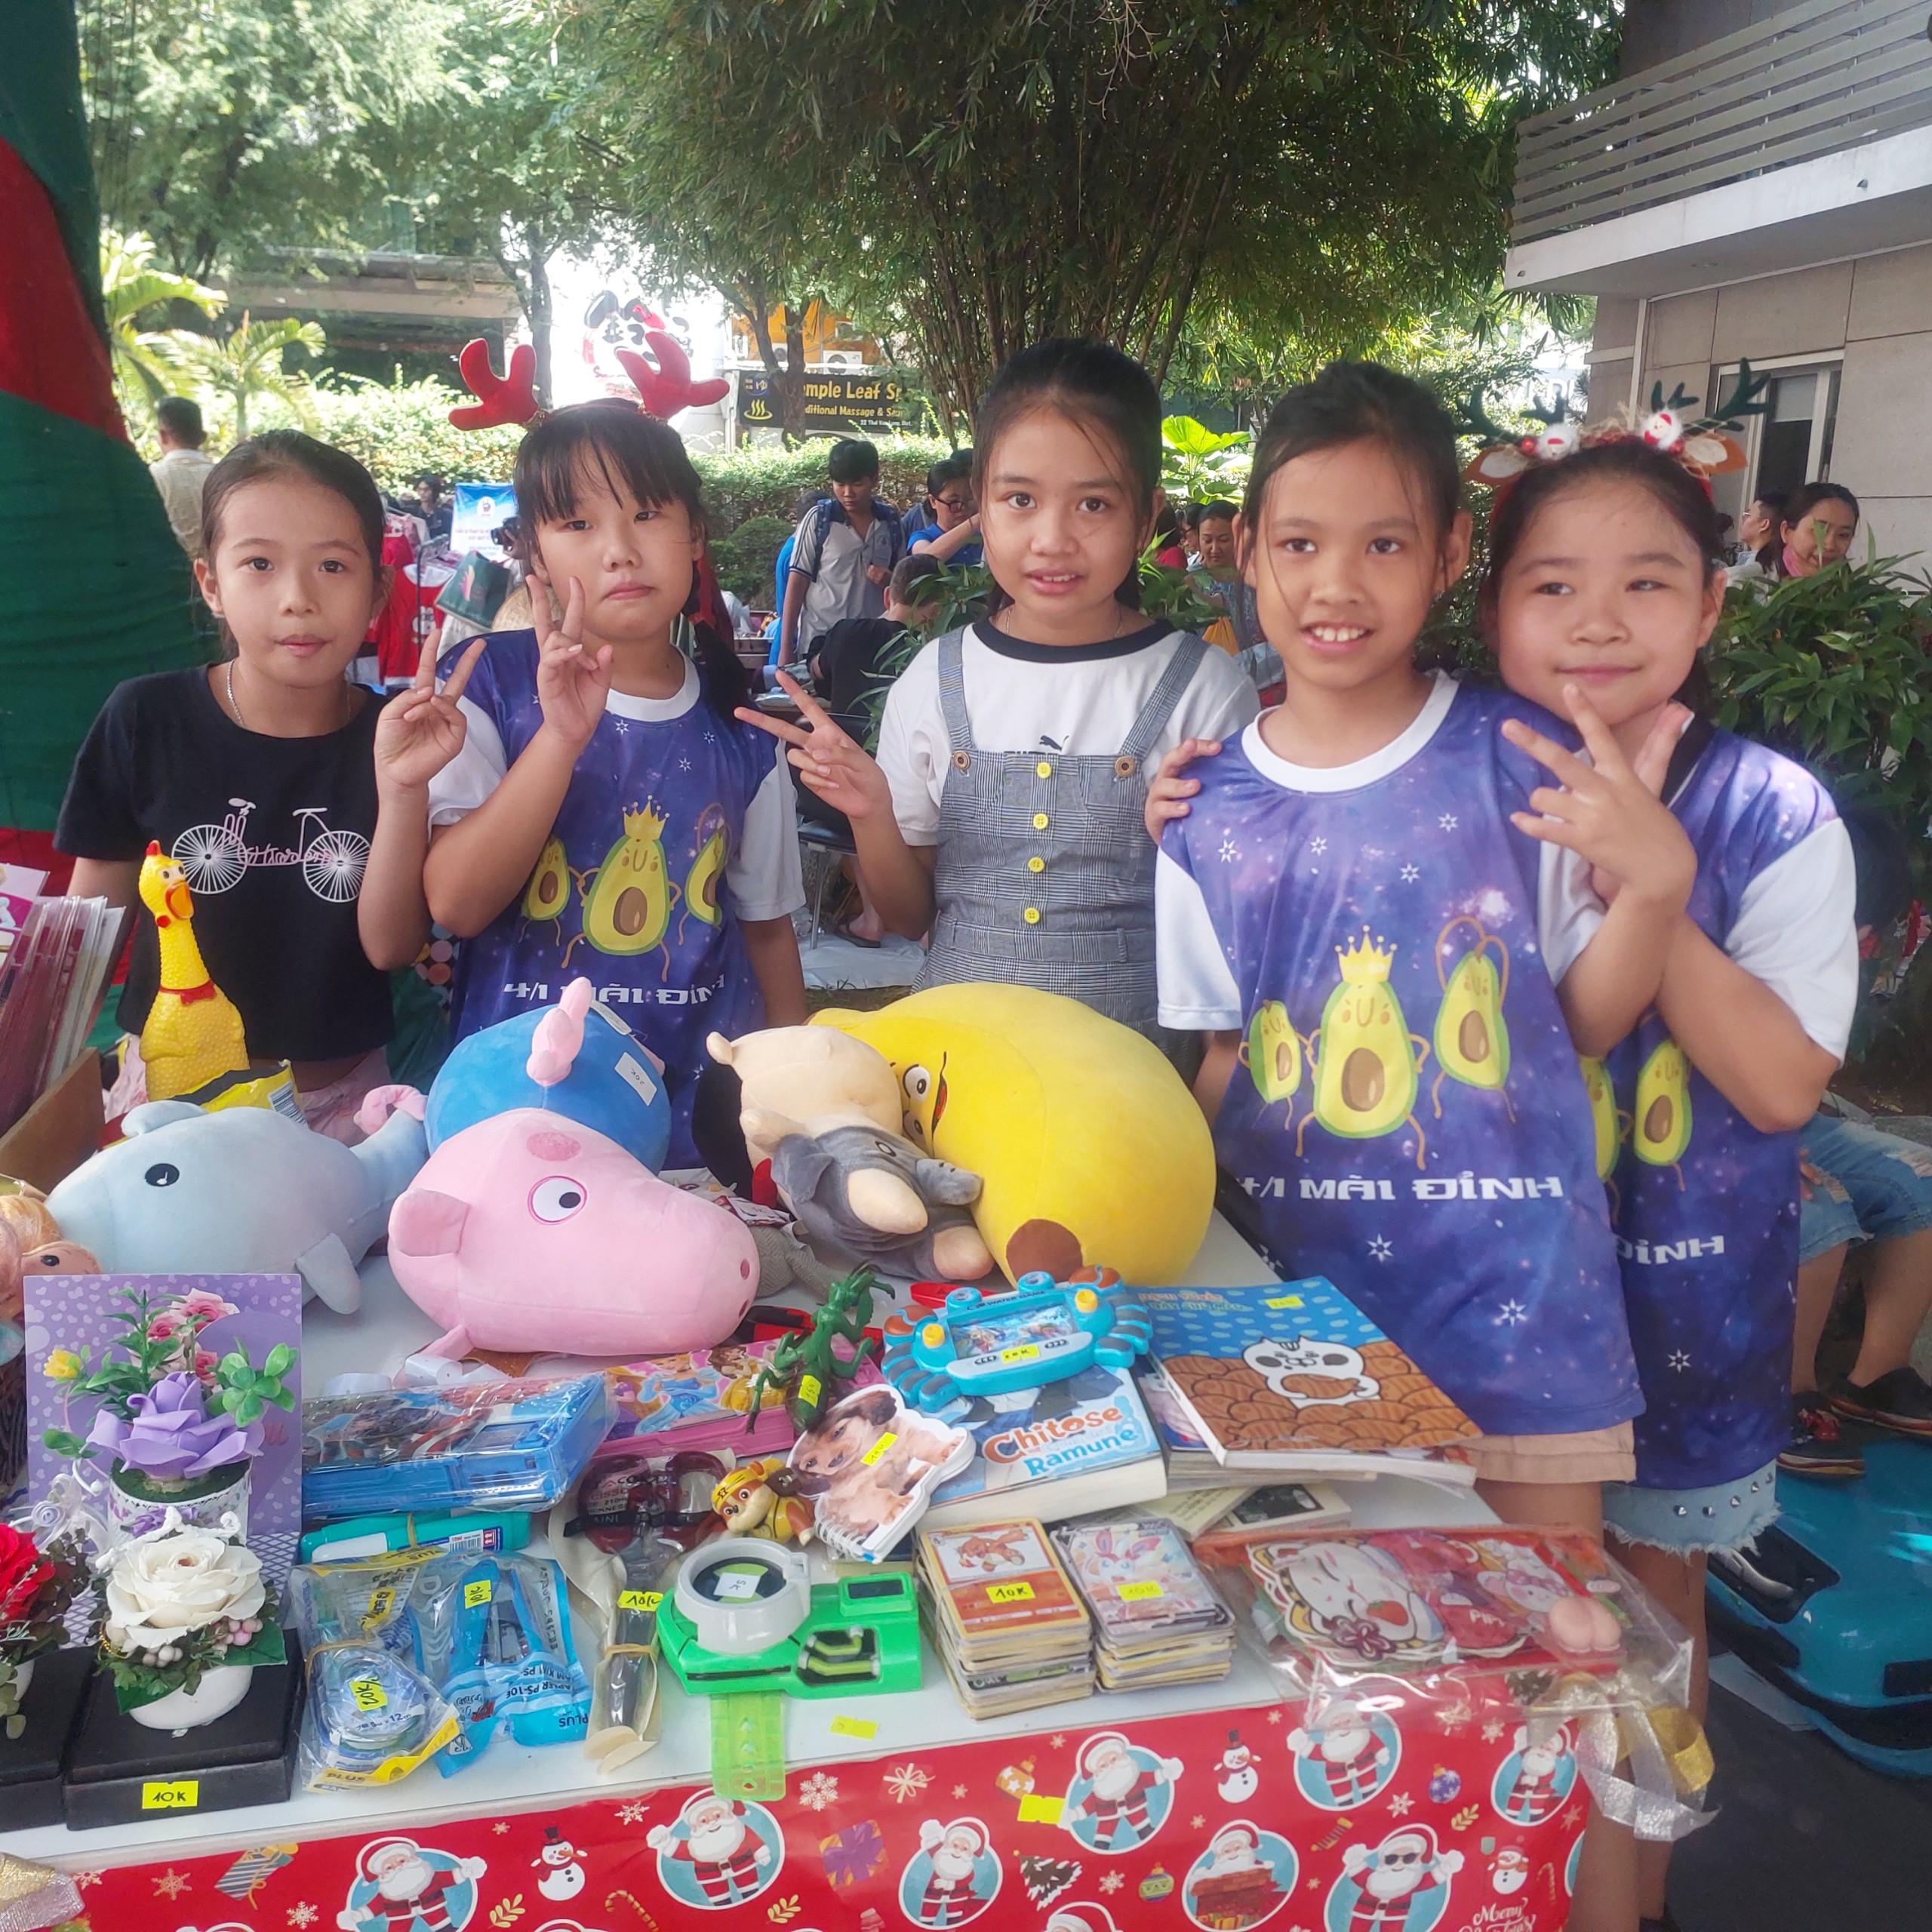 Linh (right) and her classmates come to the fair to help her mom. Photo: Minh Chau / Tuoi Tre News